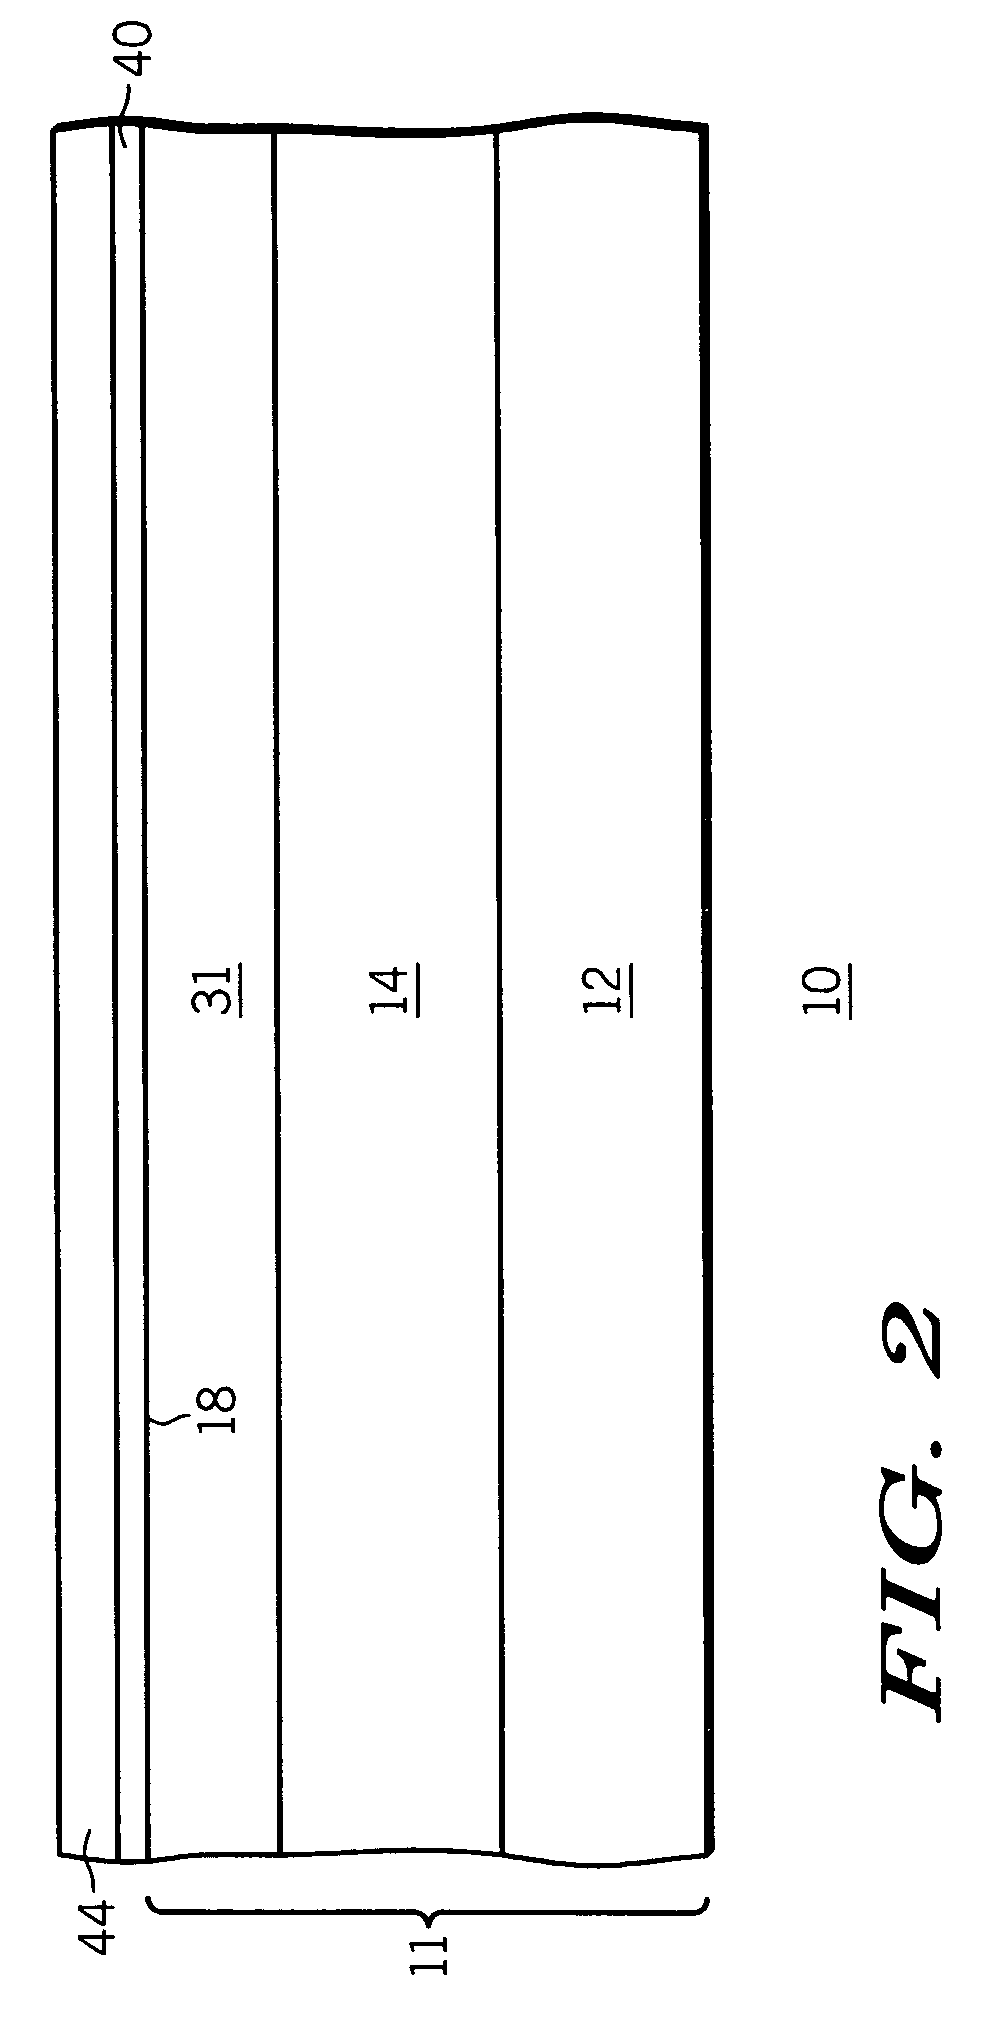 Semiconductor device having trench charge compensation regions and method